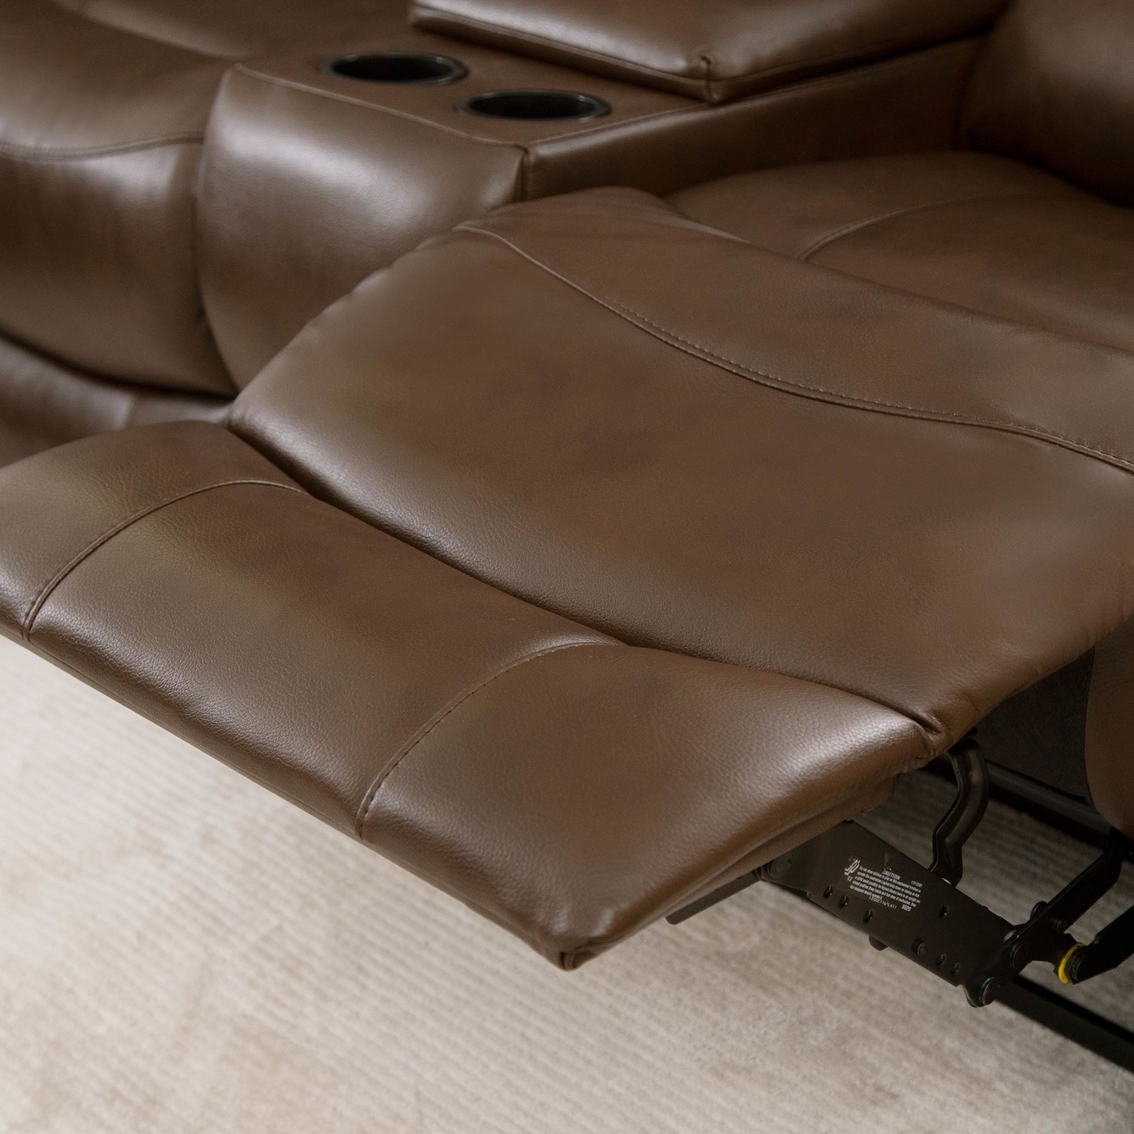 Abbyson Living Calabasas Leather Reclining, 3 pc. Set - Image 7 of 9